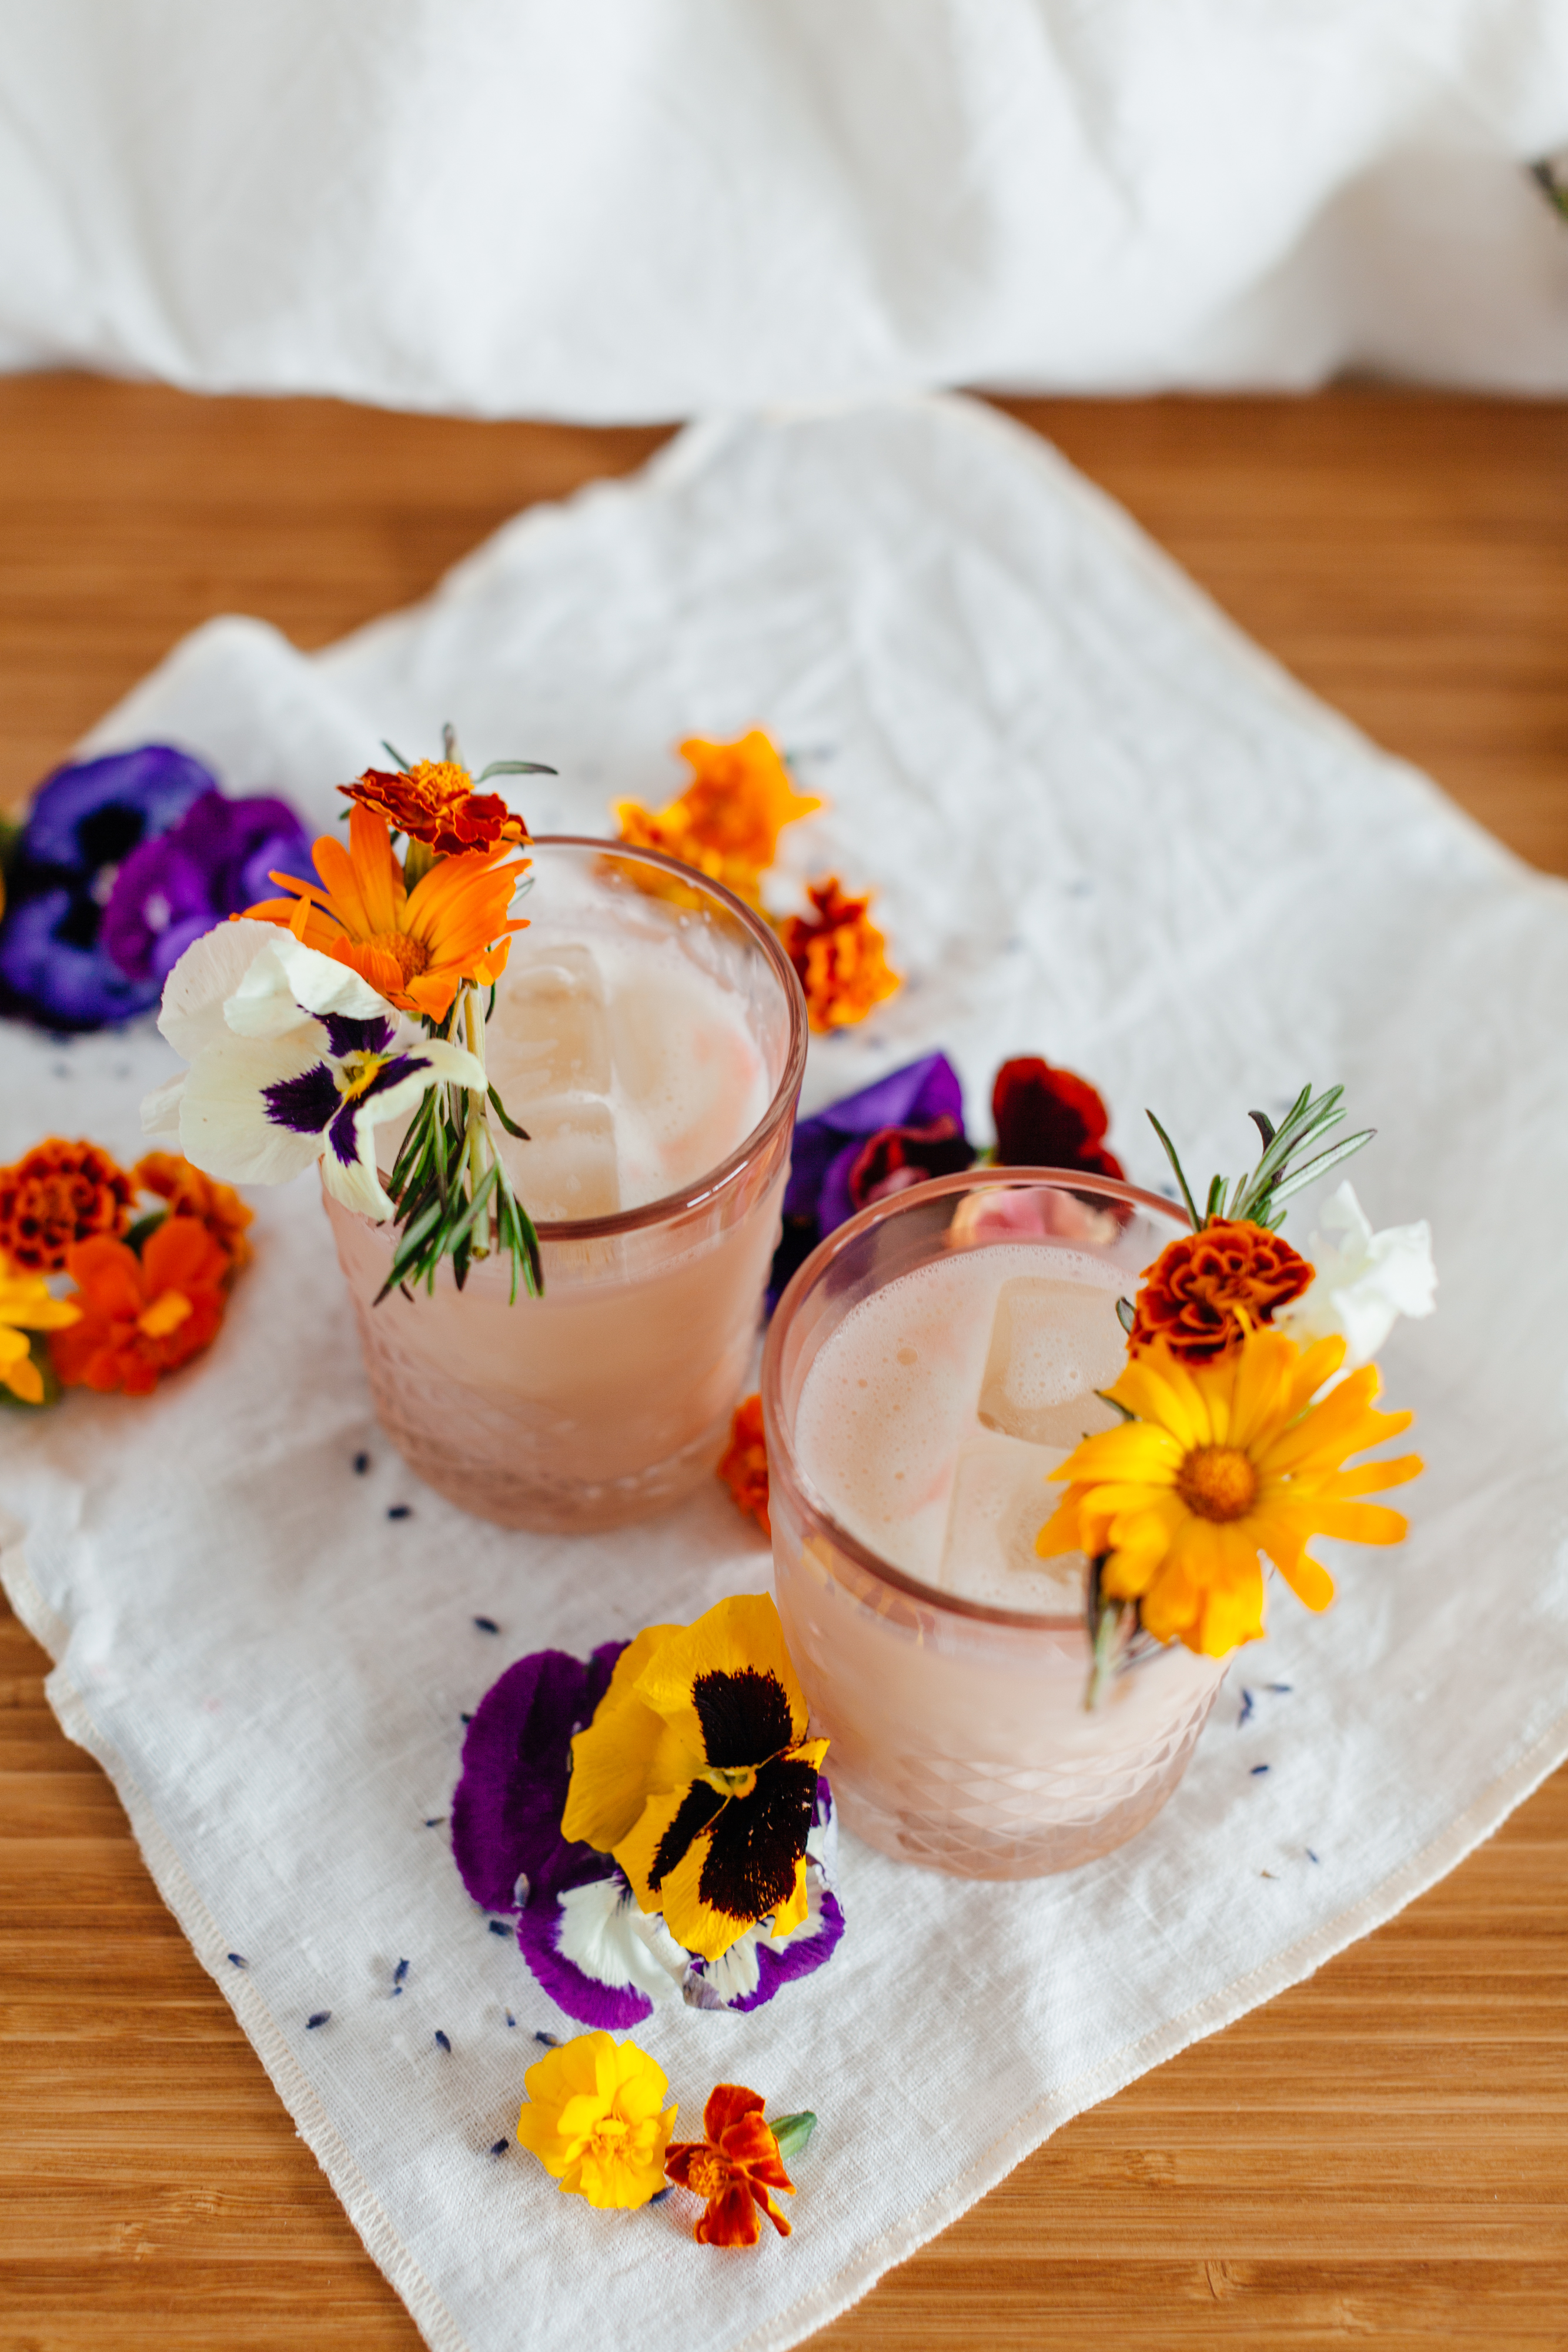 A Lavender Milk Punch recipe just in time for the sunny spring weather! | bygabriella.co